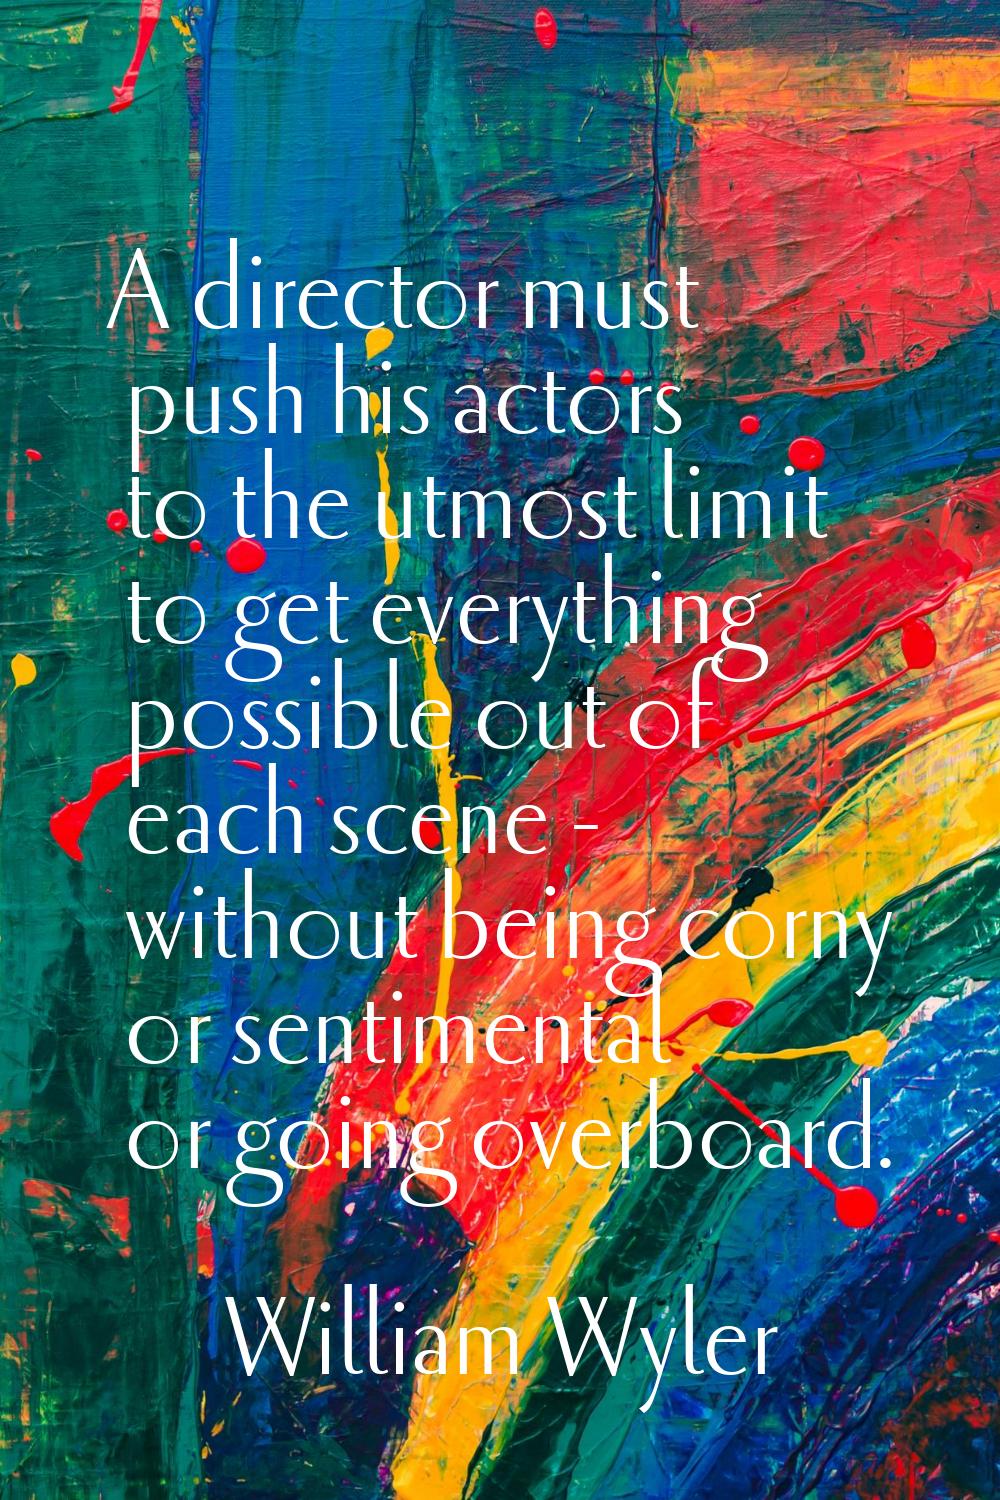 A director must push his actors to the utmost limit to get everything possible out of each scene - 